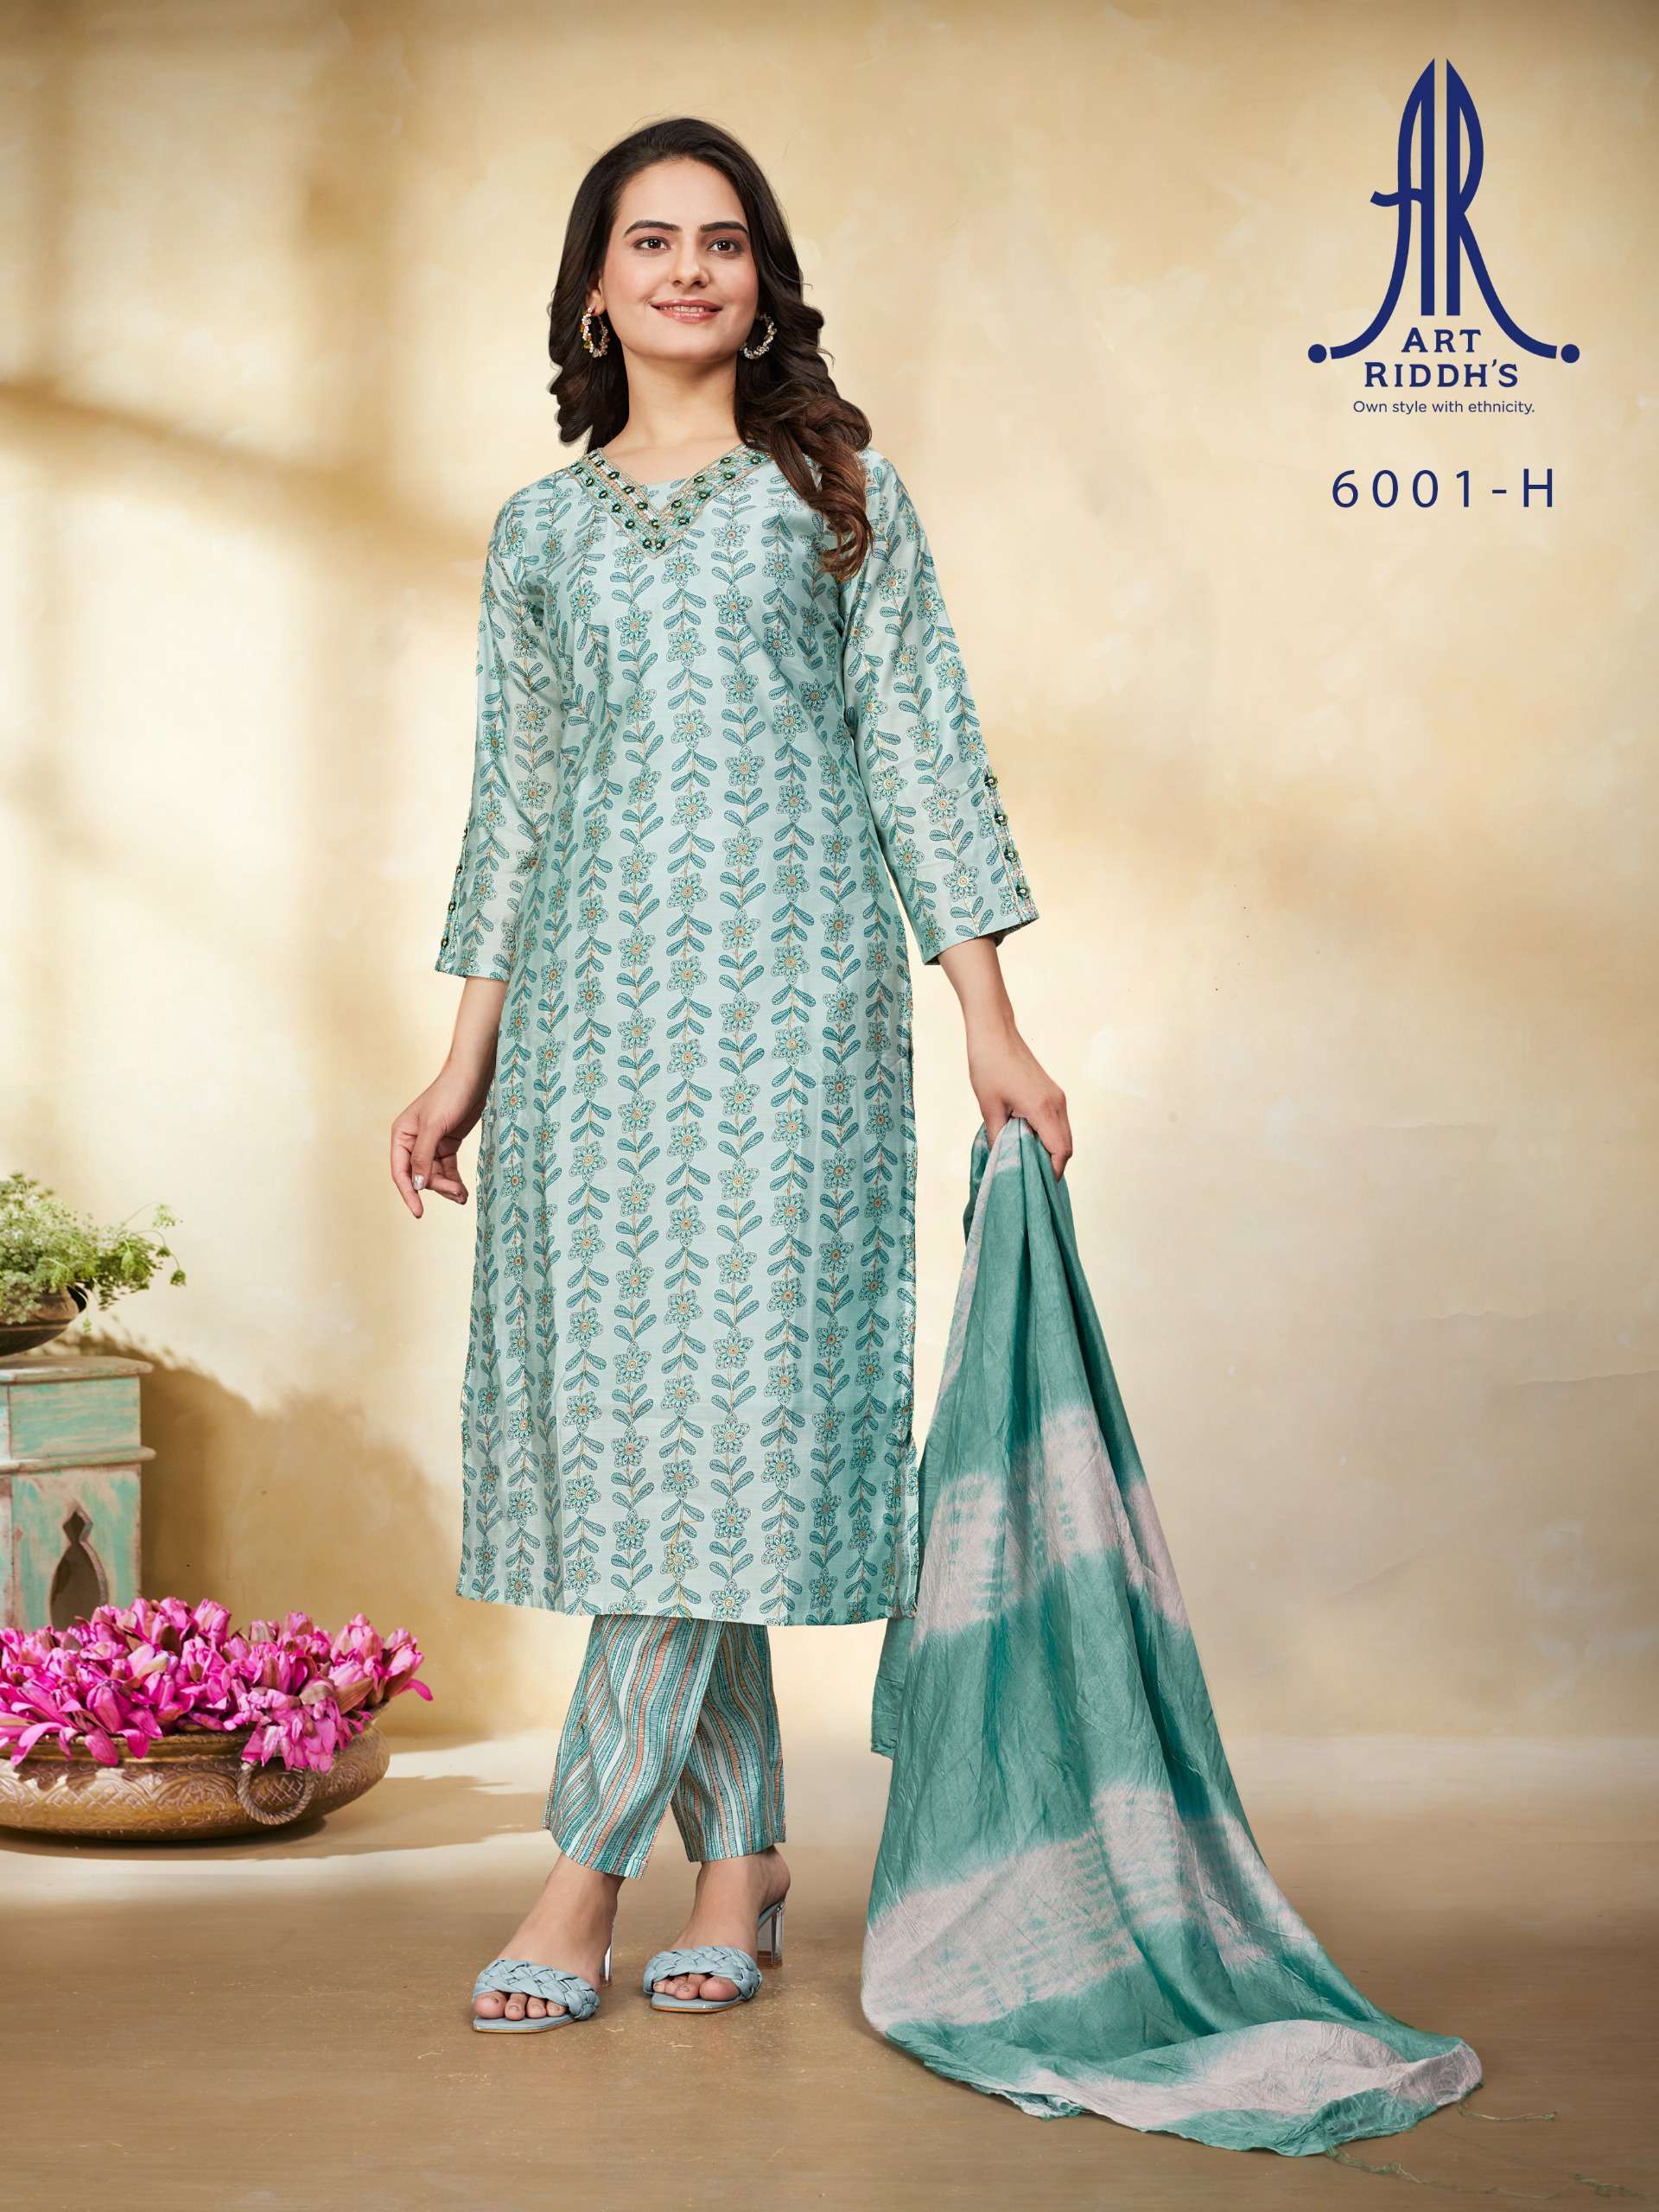 ARTRIDDH 6001 - H Kurtis suppliers for boutique in Surat